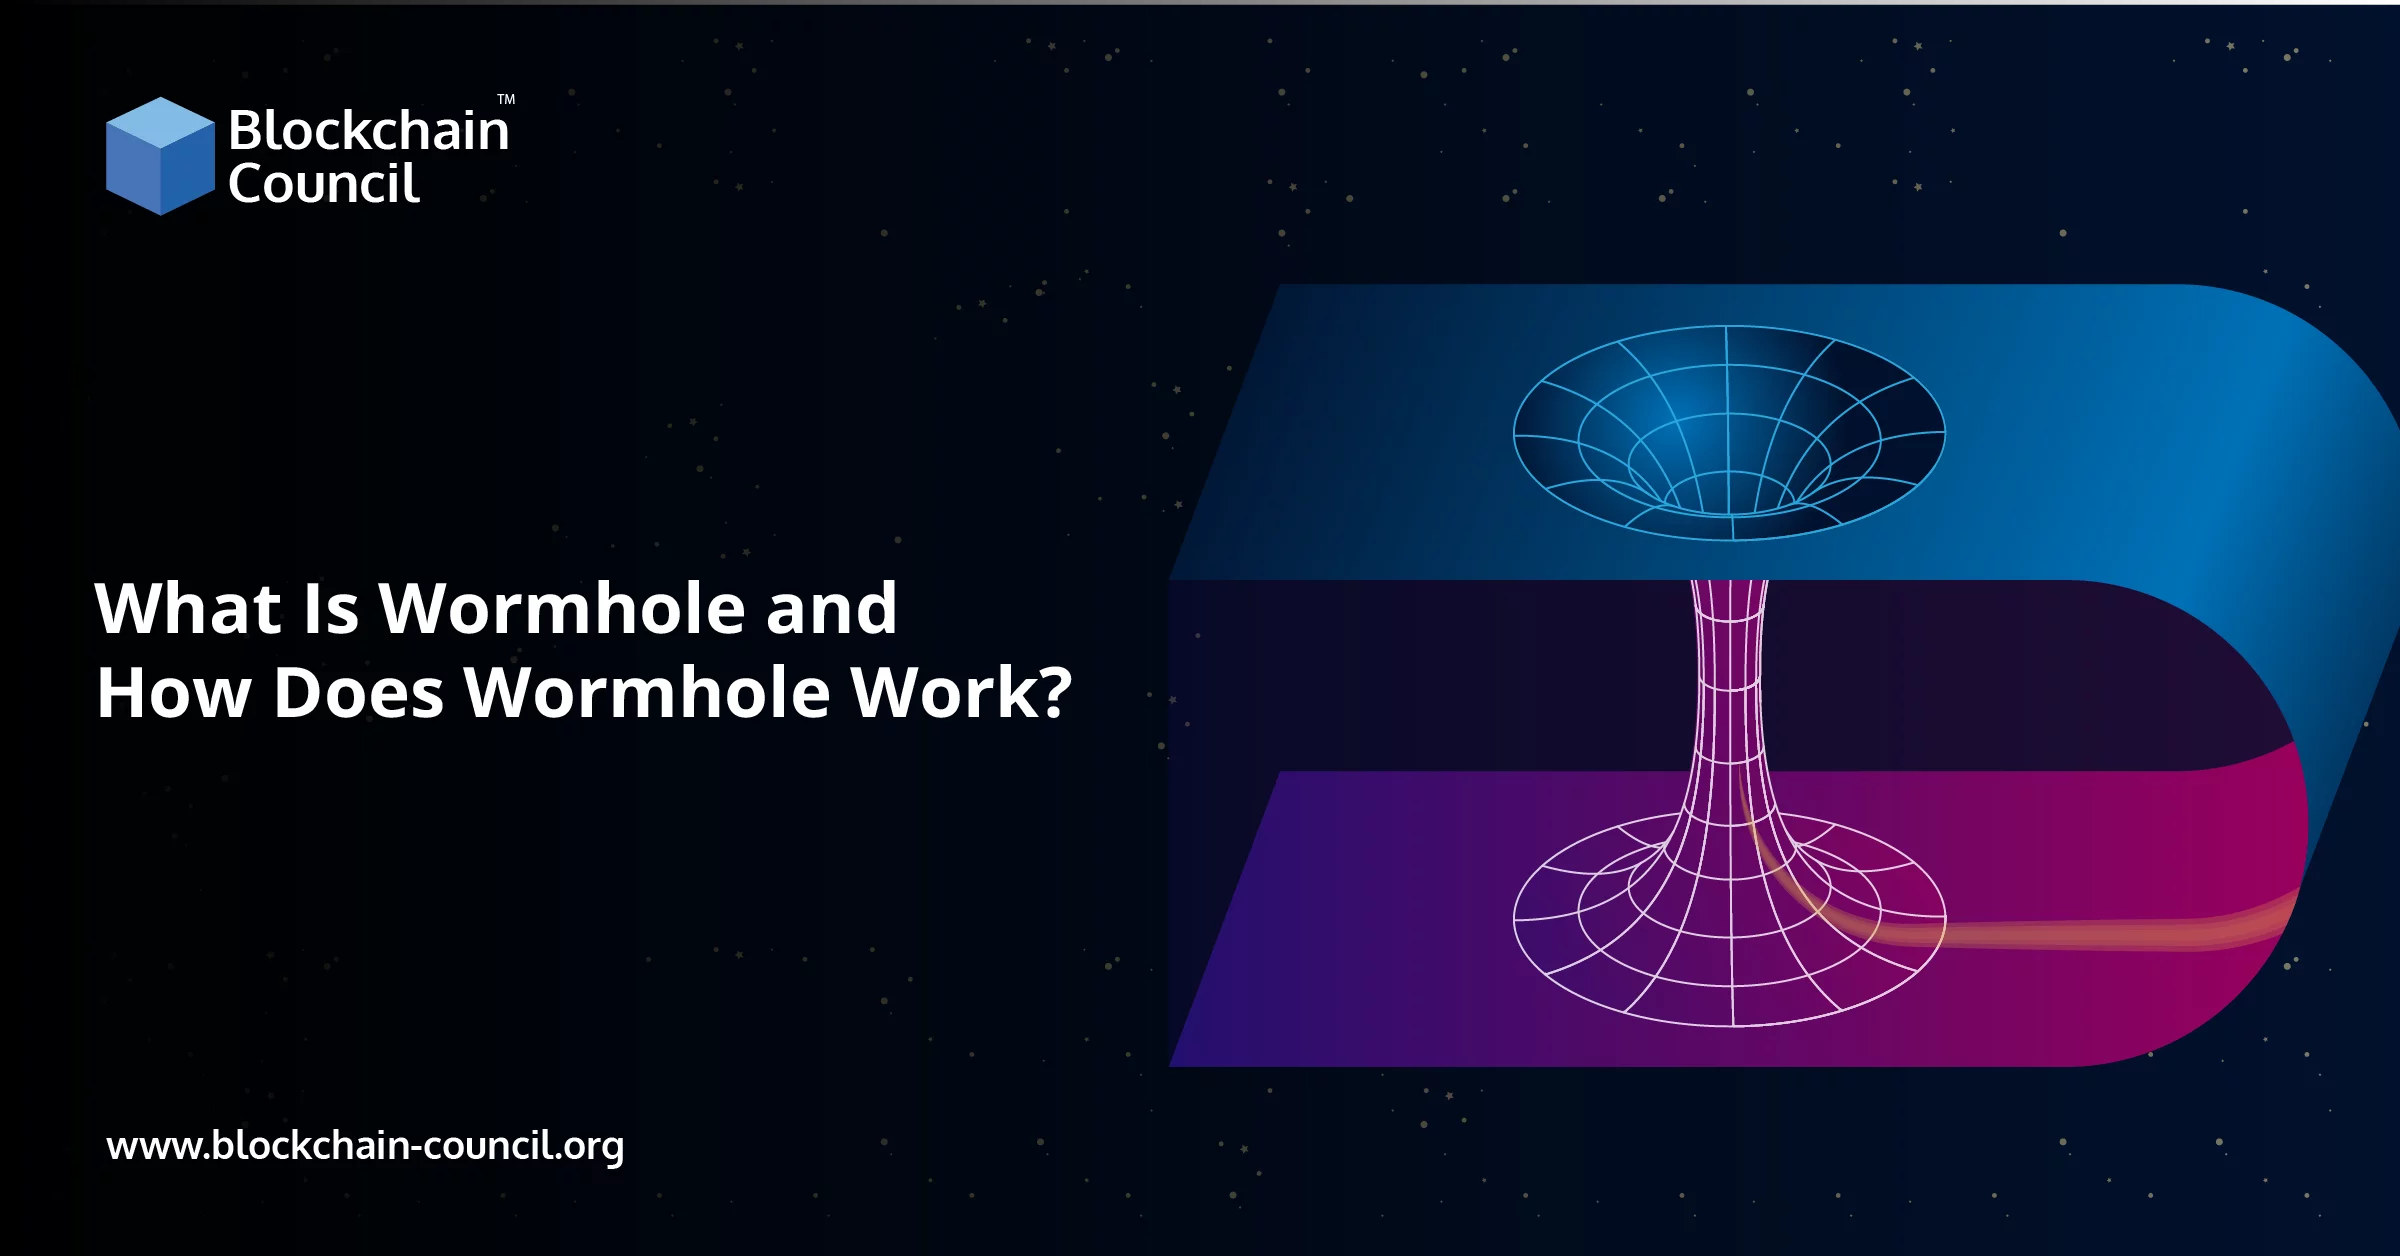 What Is Wormhole and How Does Wormhole Work?